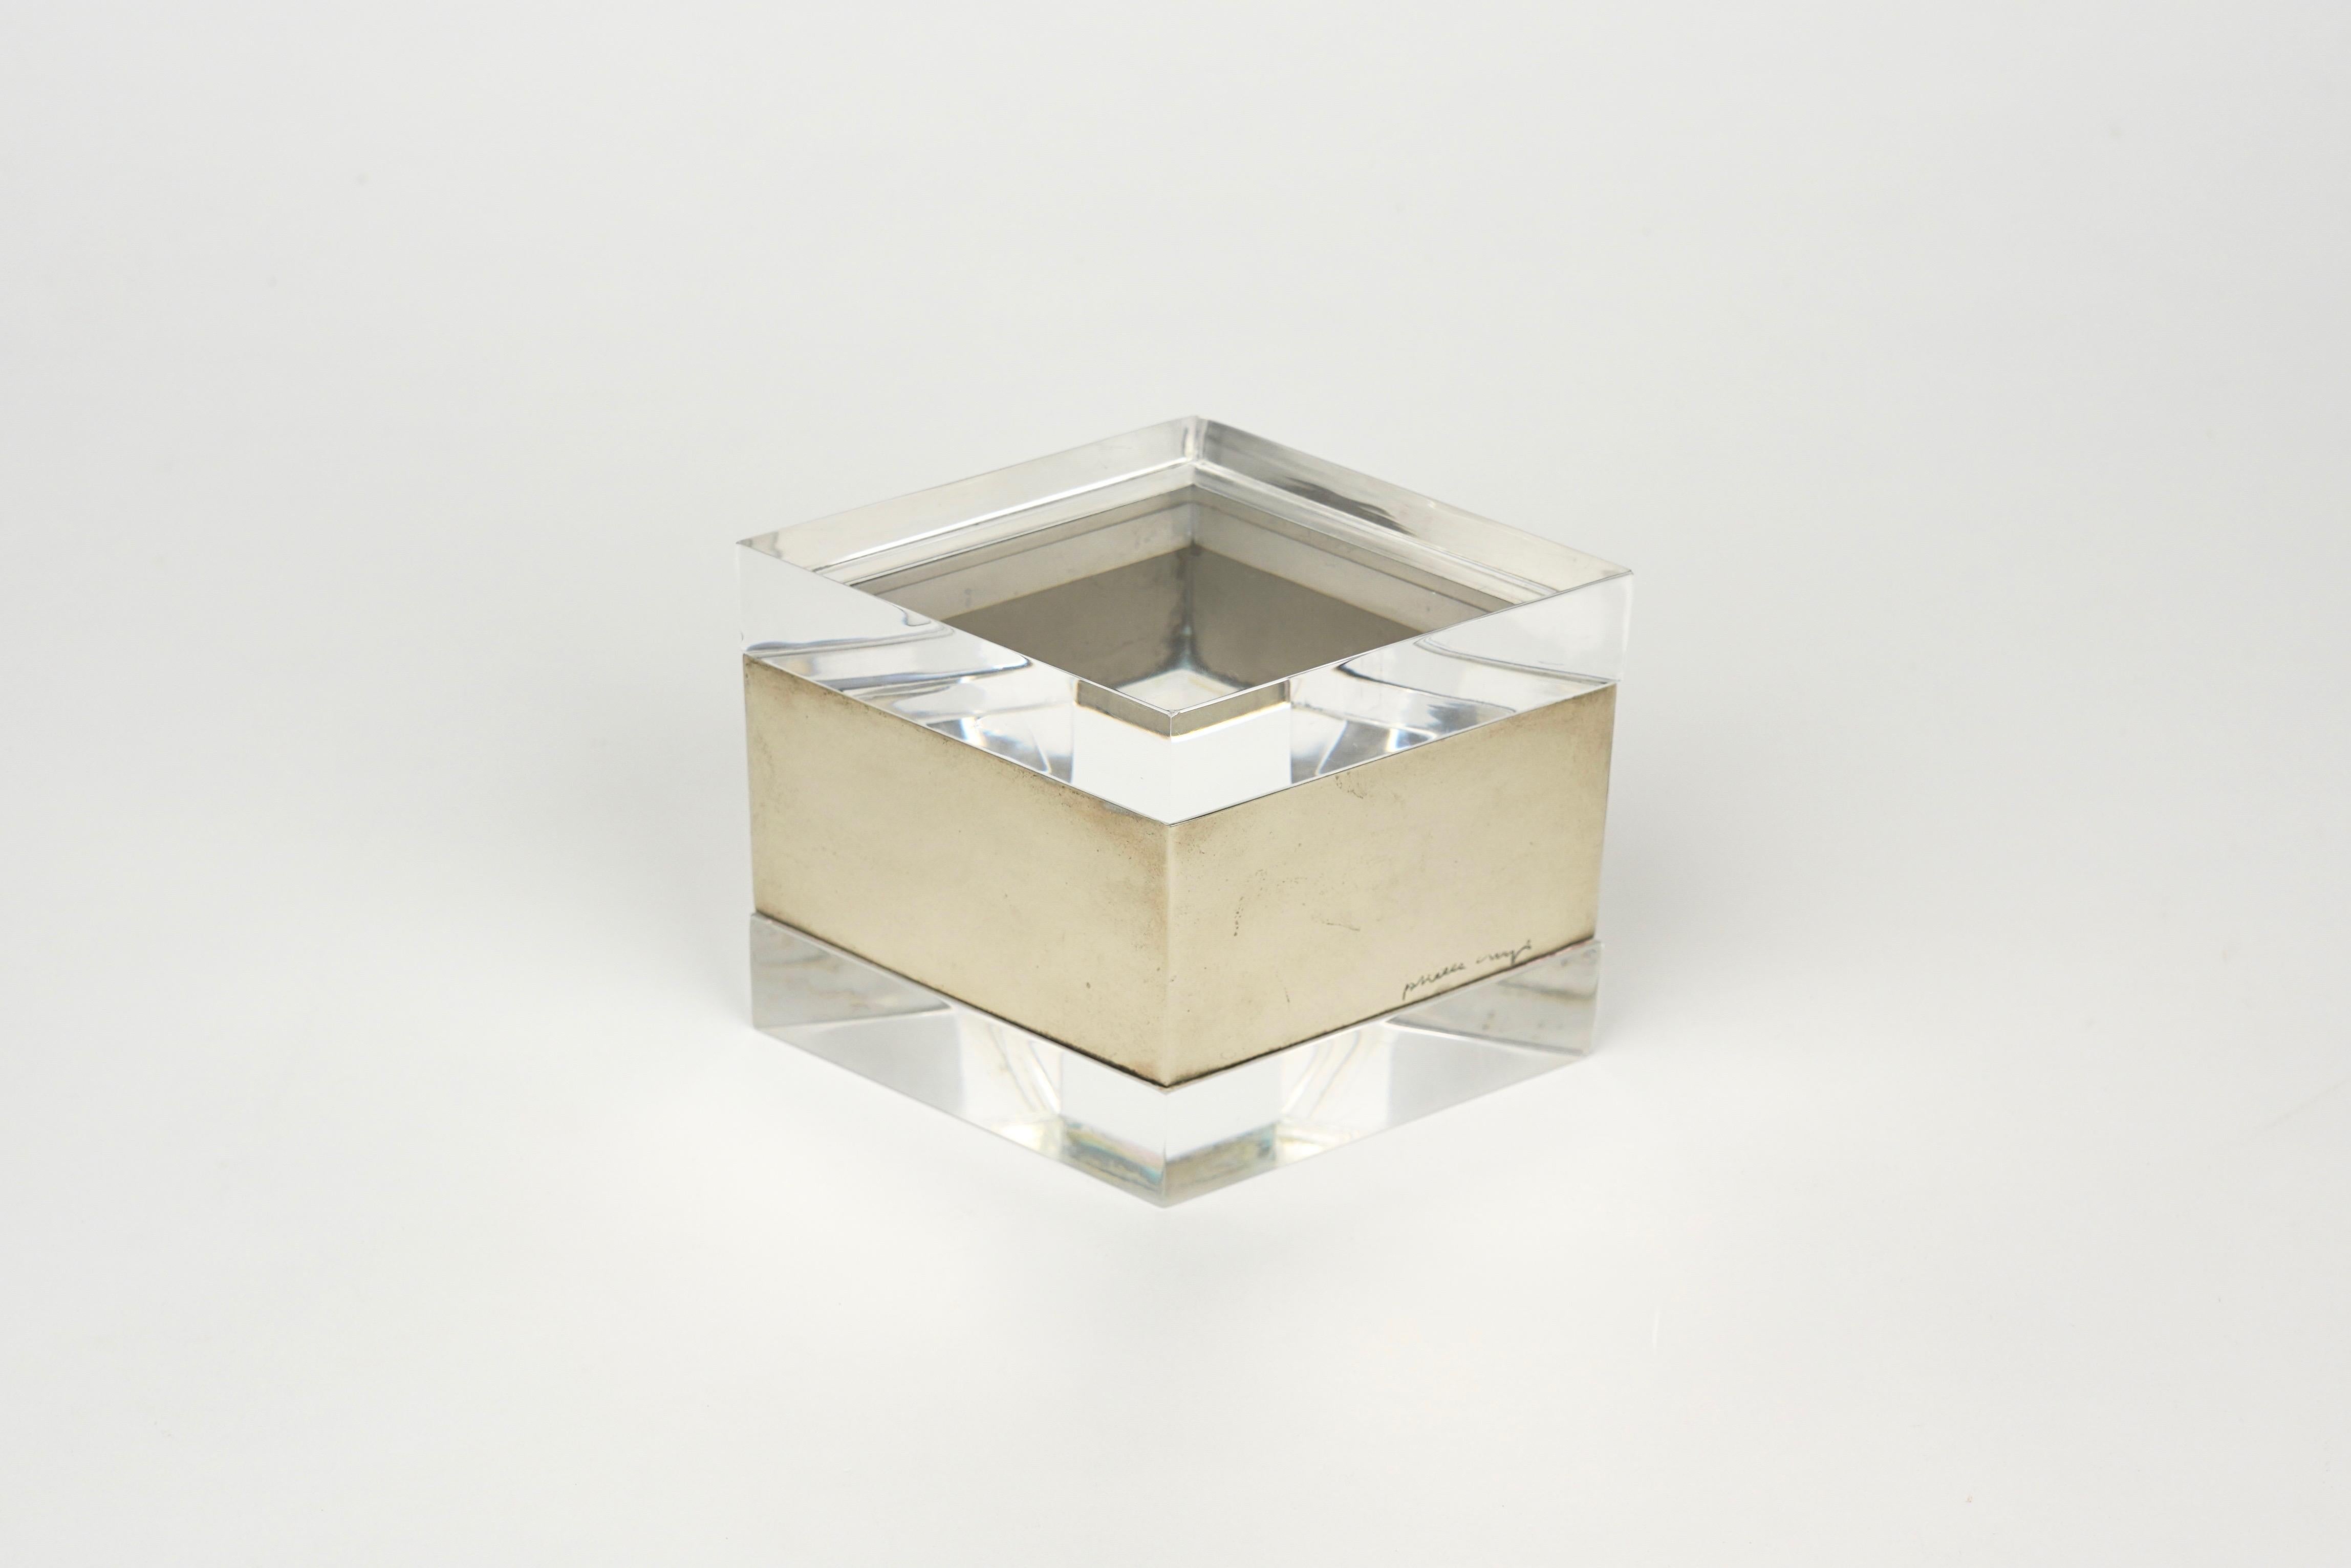 Rare box in lucite and chrome in the shape of a rhombus signed by the Italian designer Gabriella Crespi as shown in photos. Made in Italy in the 1970s. 

Conditions are good considering the age of the box, just a tiny chipping almost invisible in